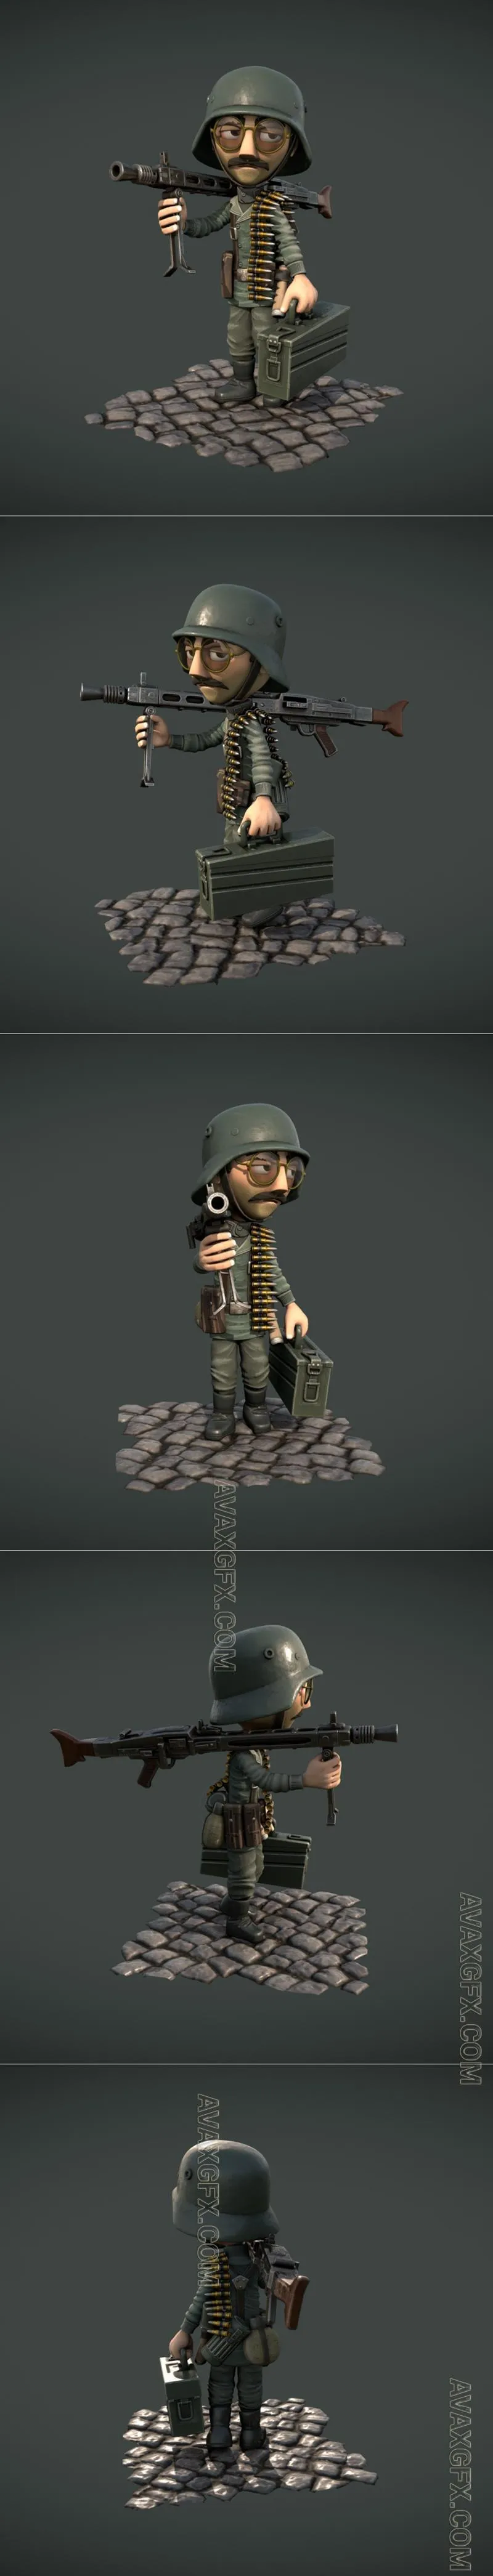 Toon Soldiers of the Wehrmacht - Friedrich - STL 3D Model